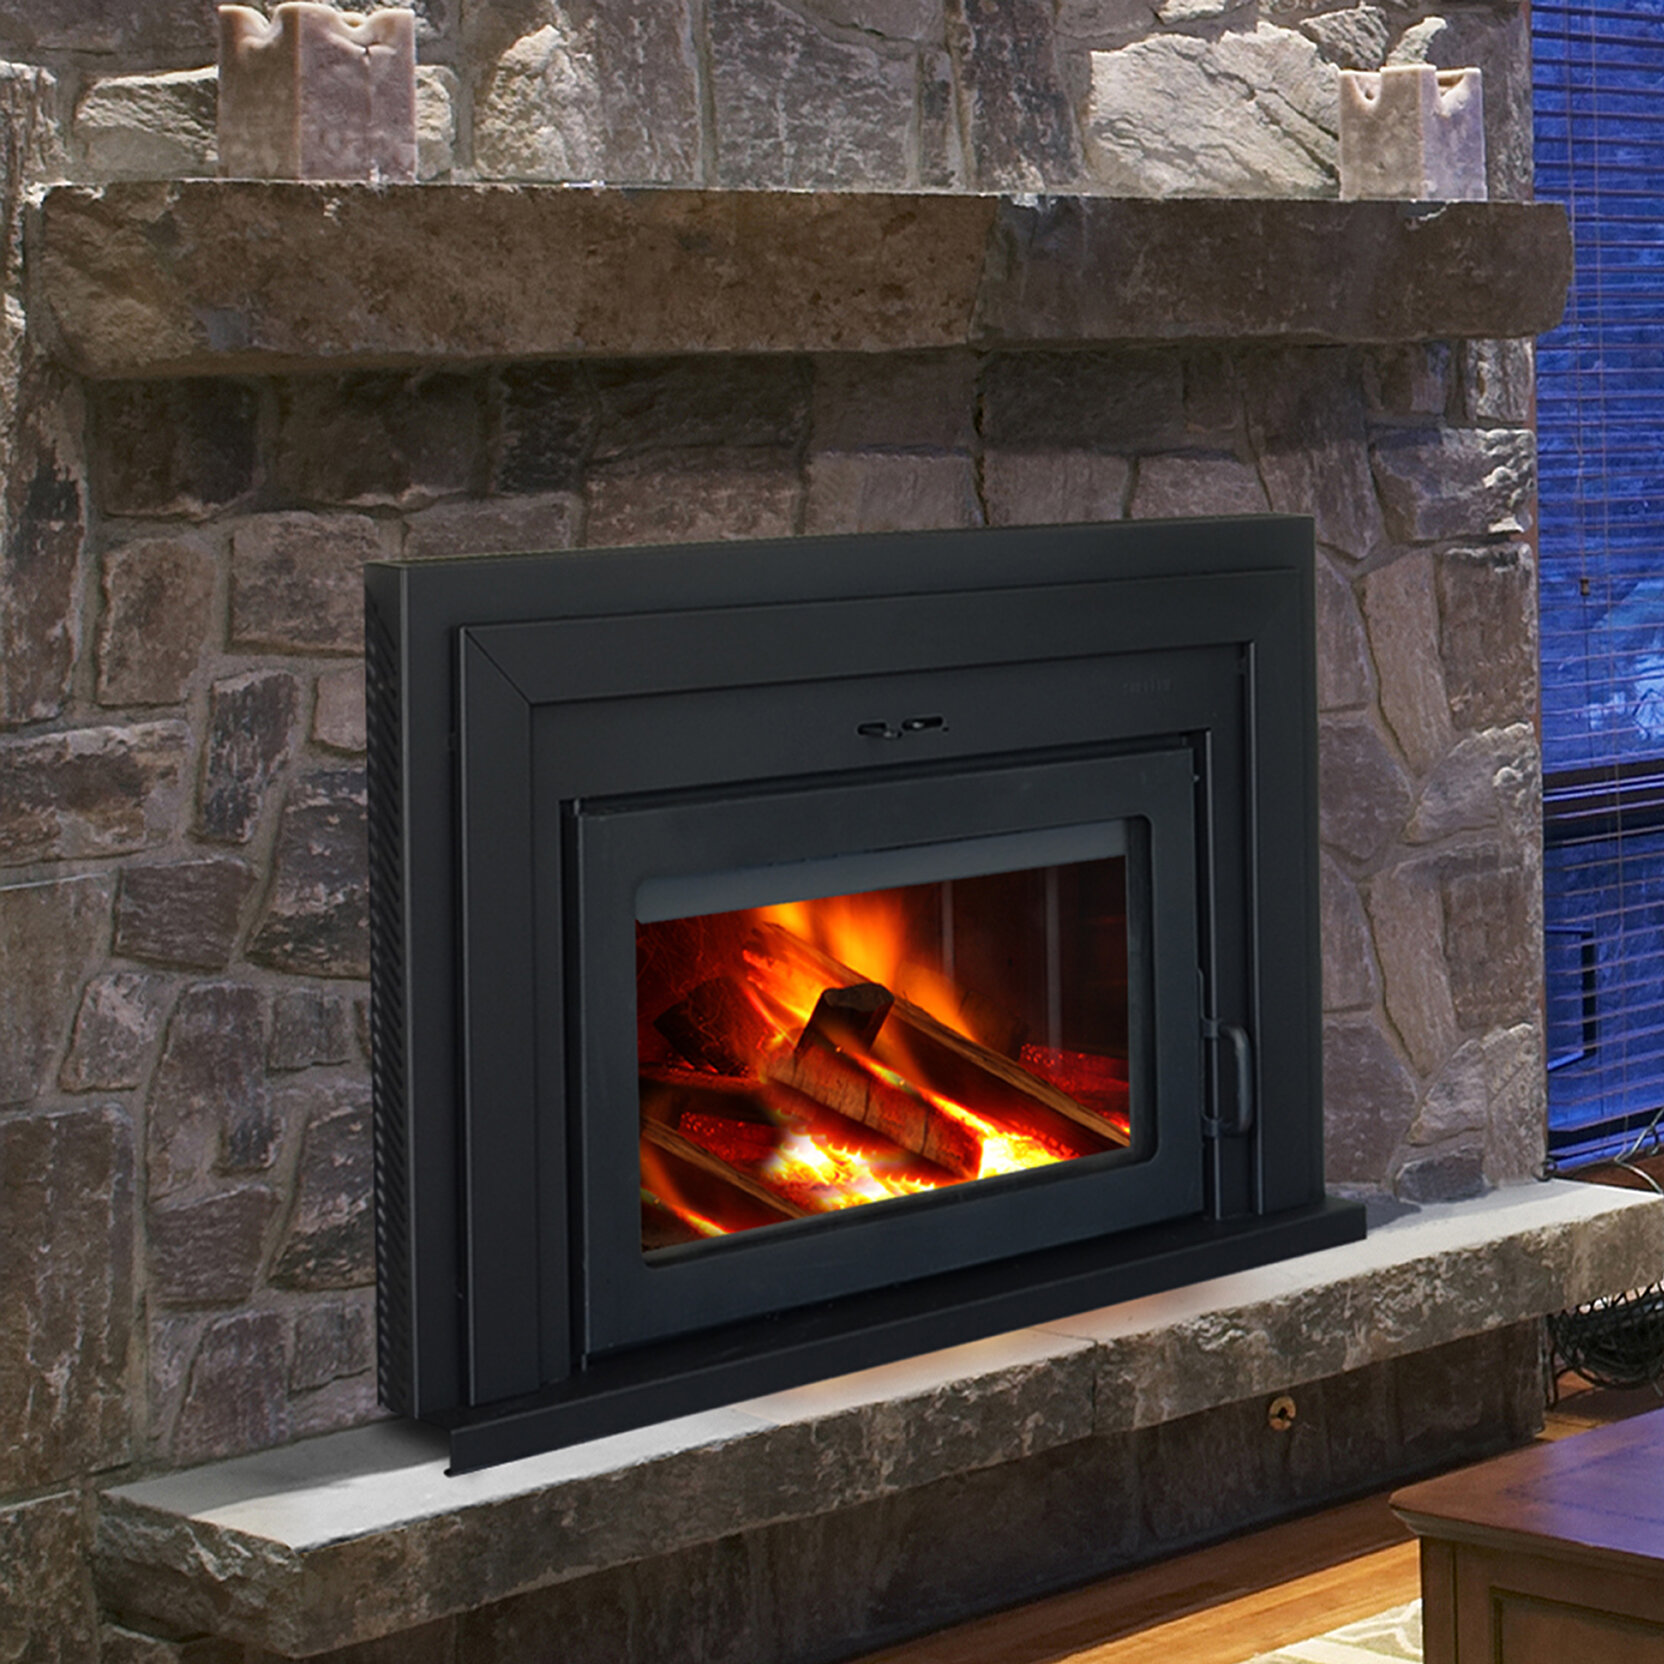 totally-twisted: High Efficiency Wood Burning Fireplace Insert